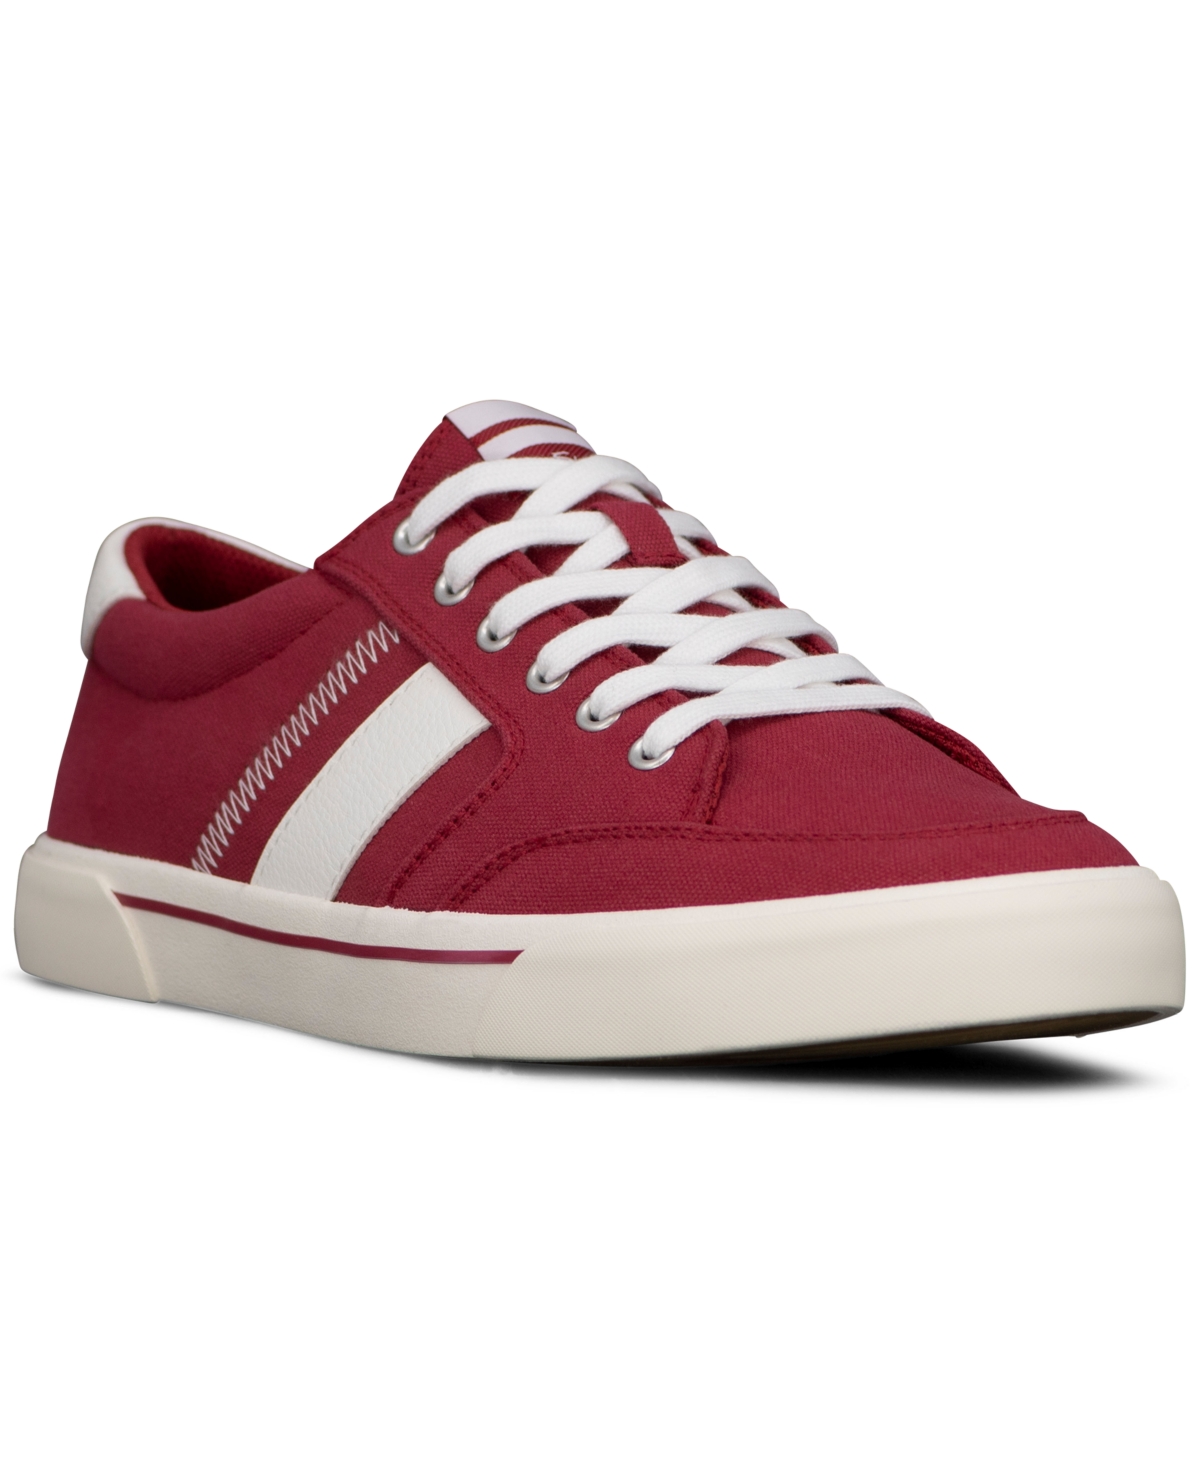 Ben Sherman Men's Hawthorn Low Canvas Casual Sneakers From Finish Line In Burgundy